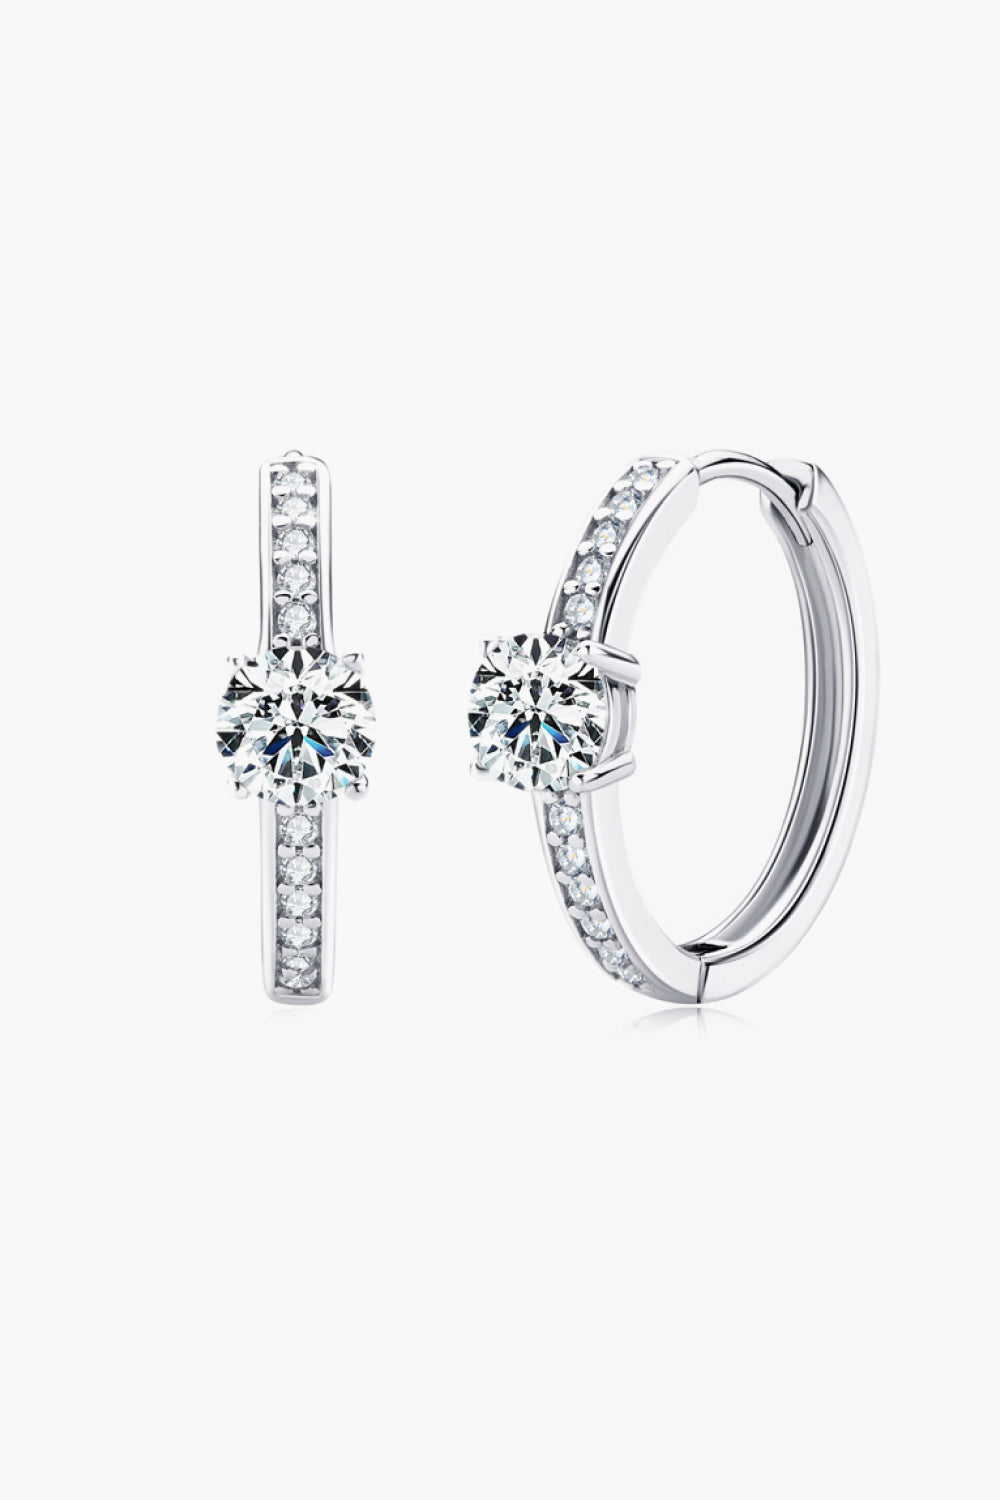 Women’s Carry Your Love 1 Carat Moissanite Platinum-Plated Earrings